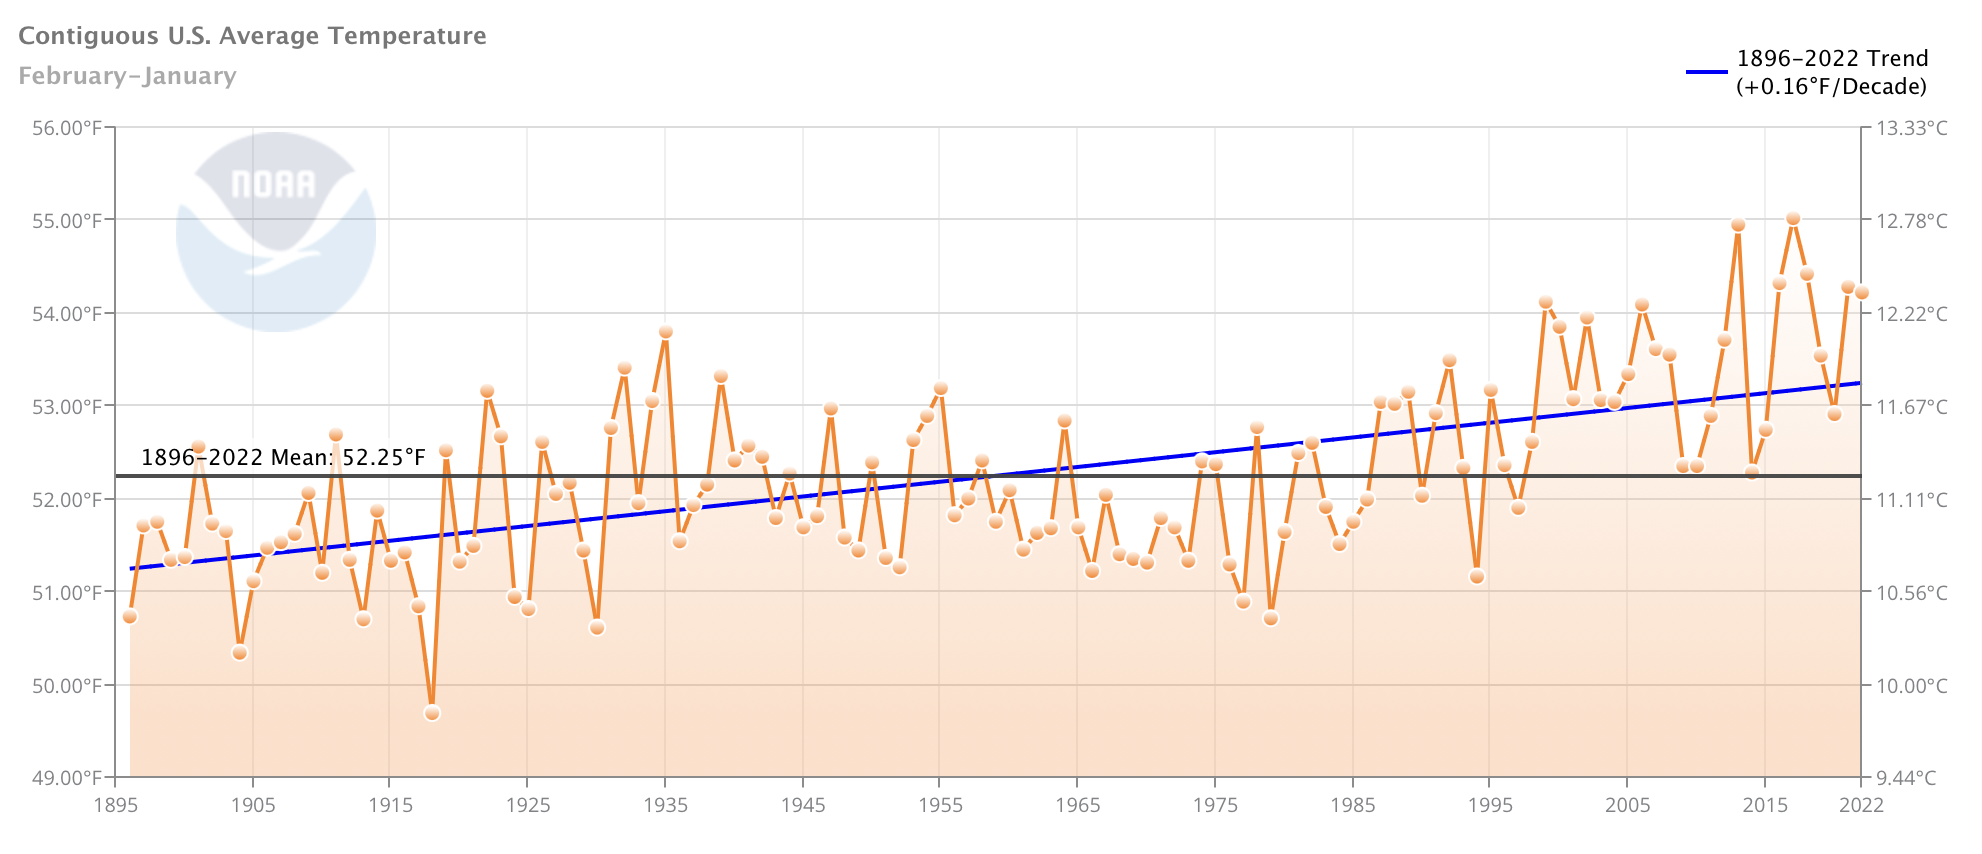 Trends of US Temperatures since 1895